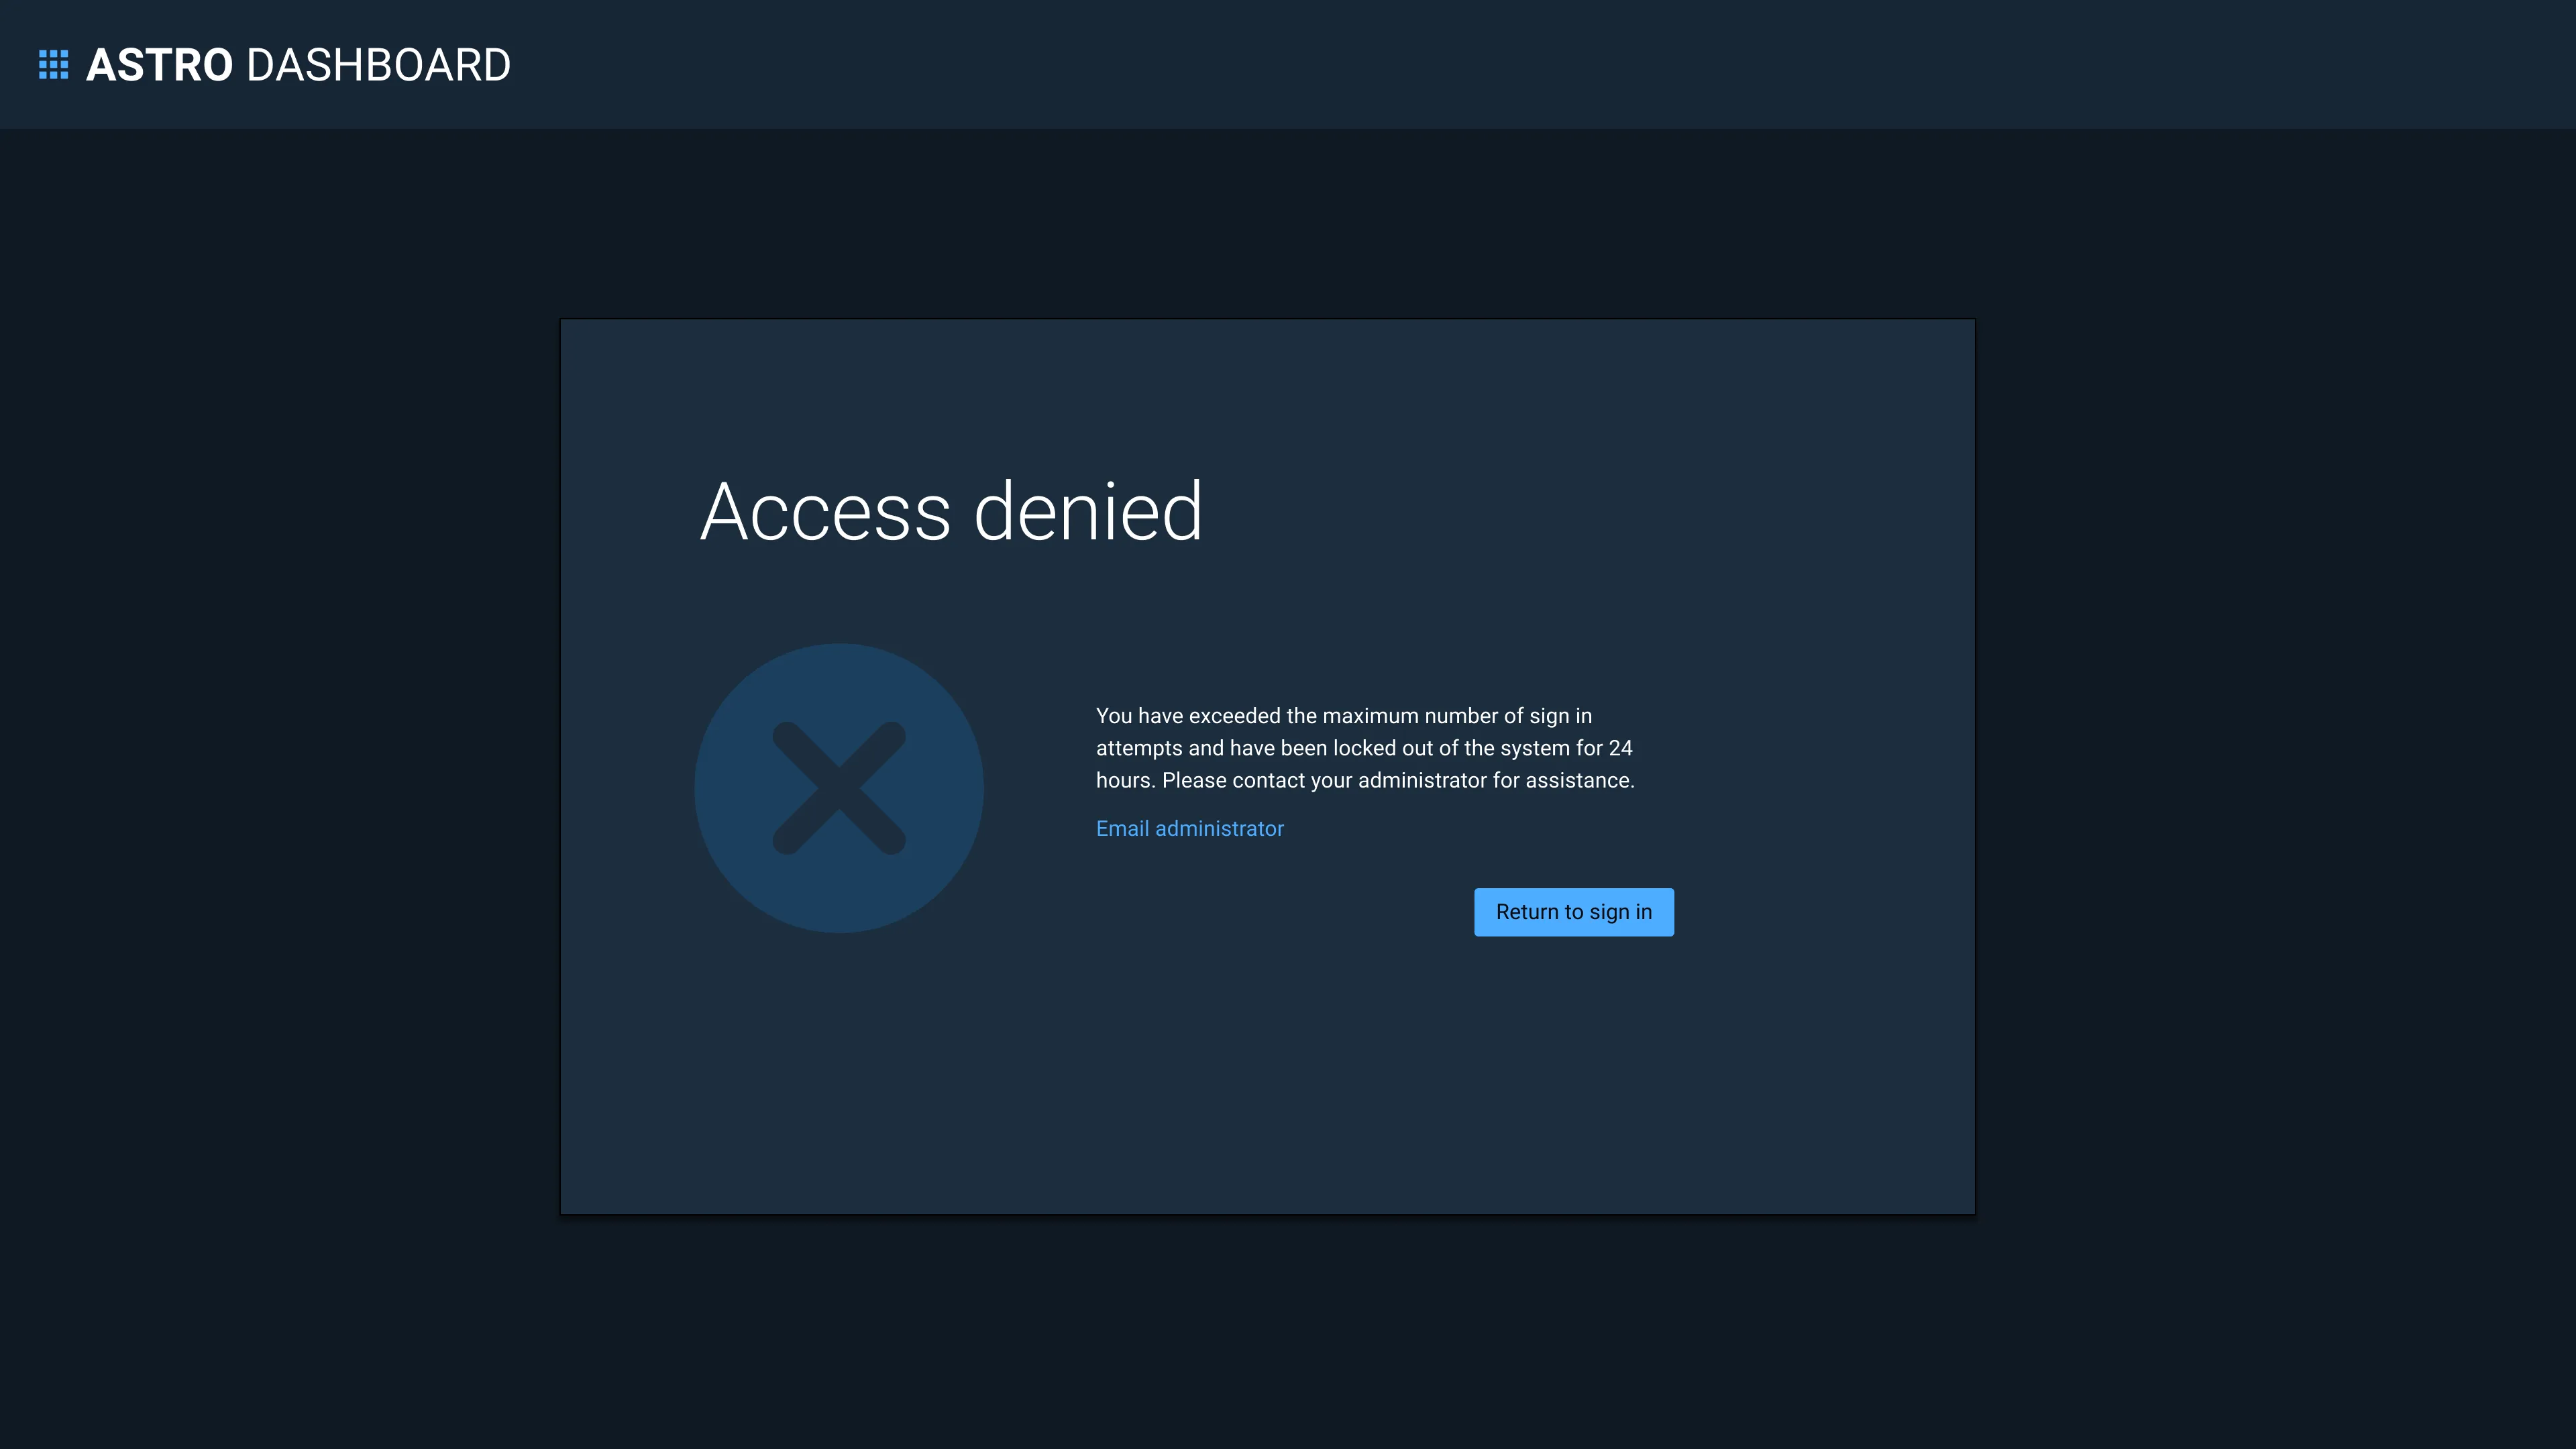 Example of a full-page account lock out (access denied) screen